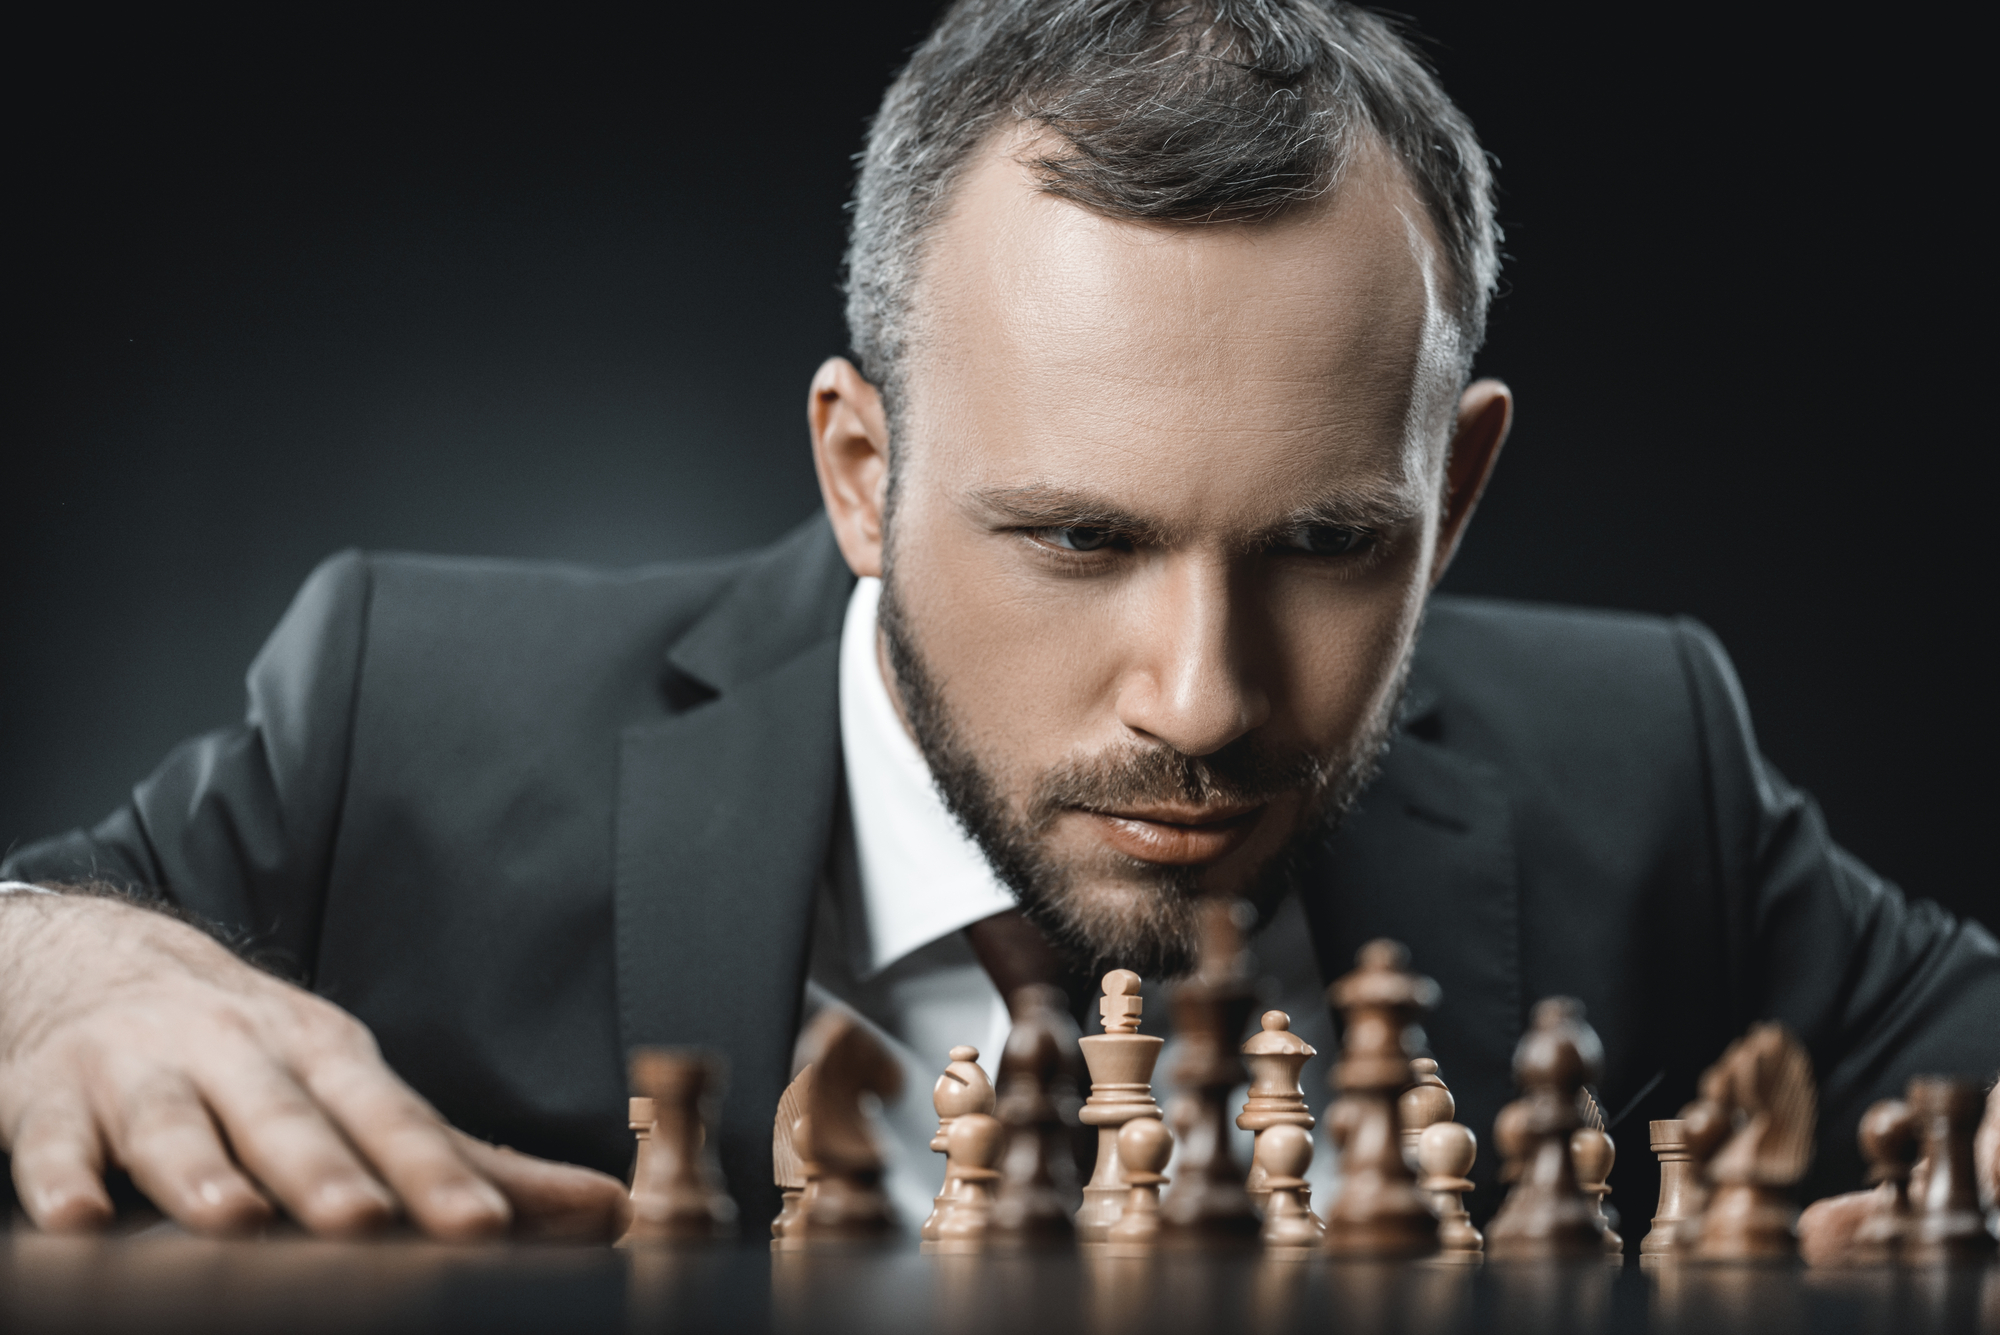 Pensive businessman and chess